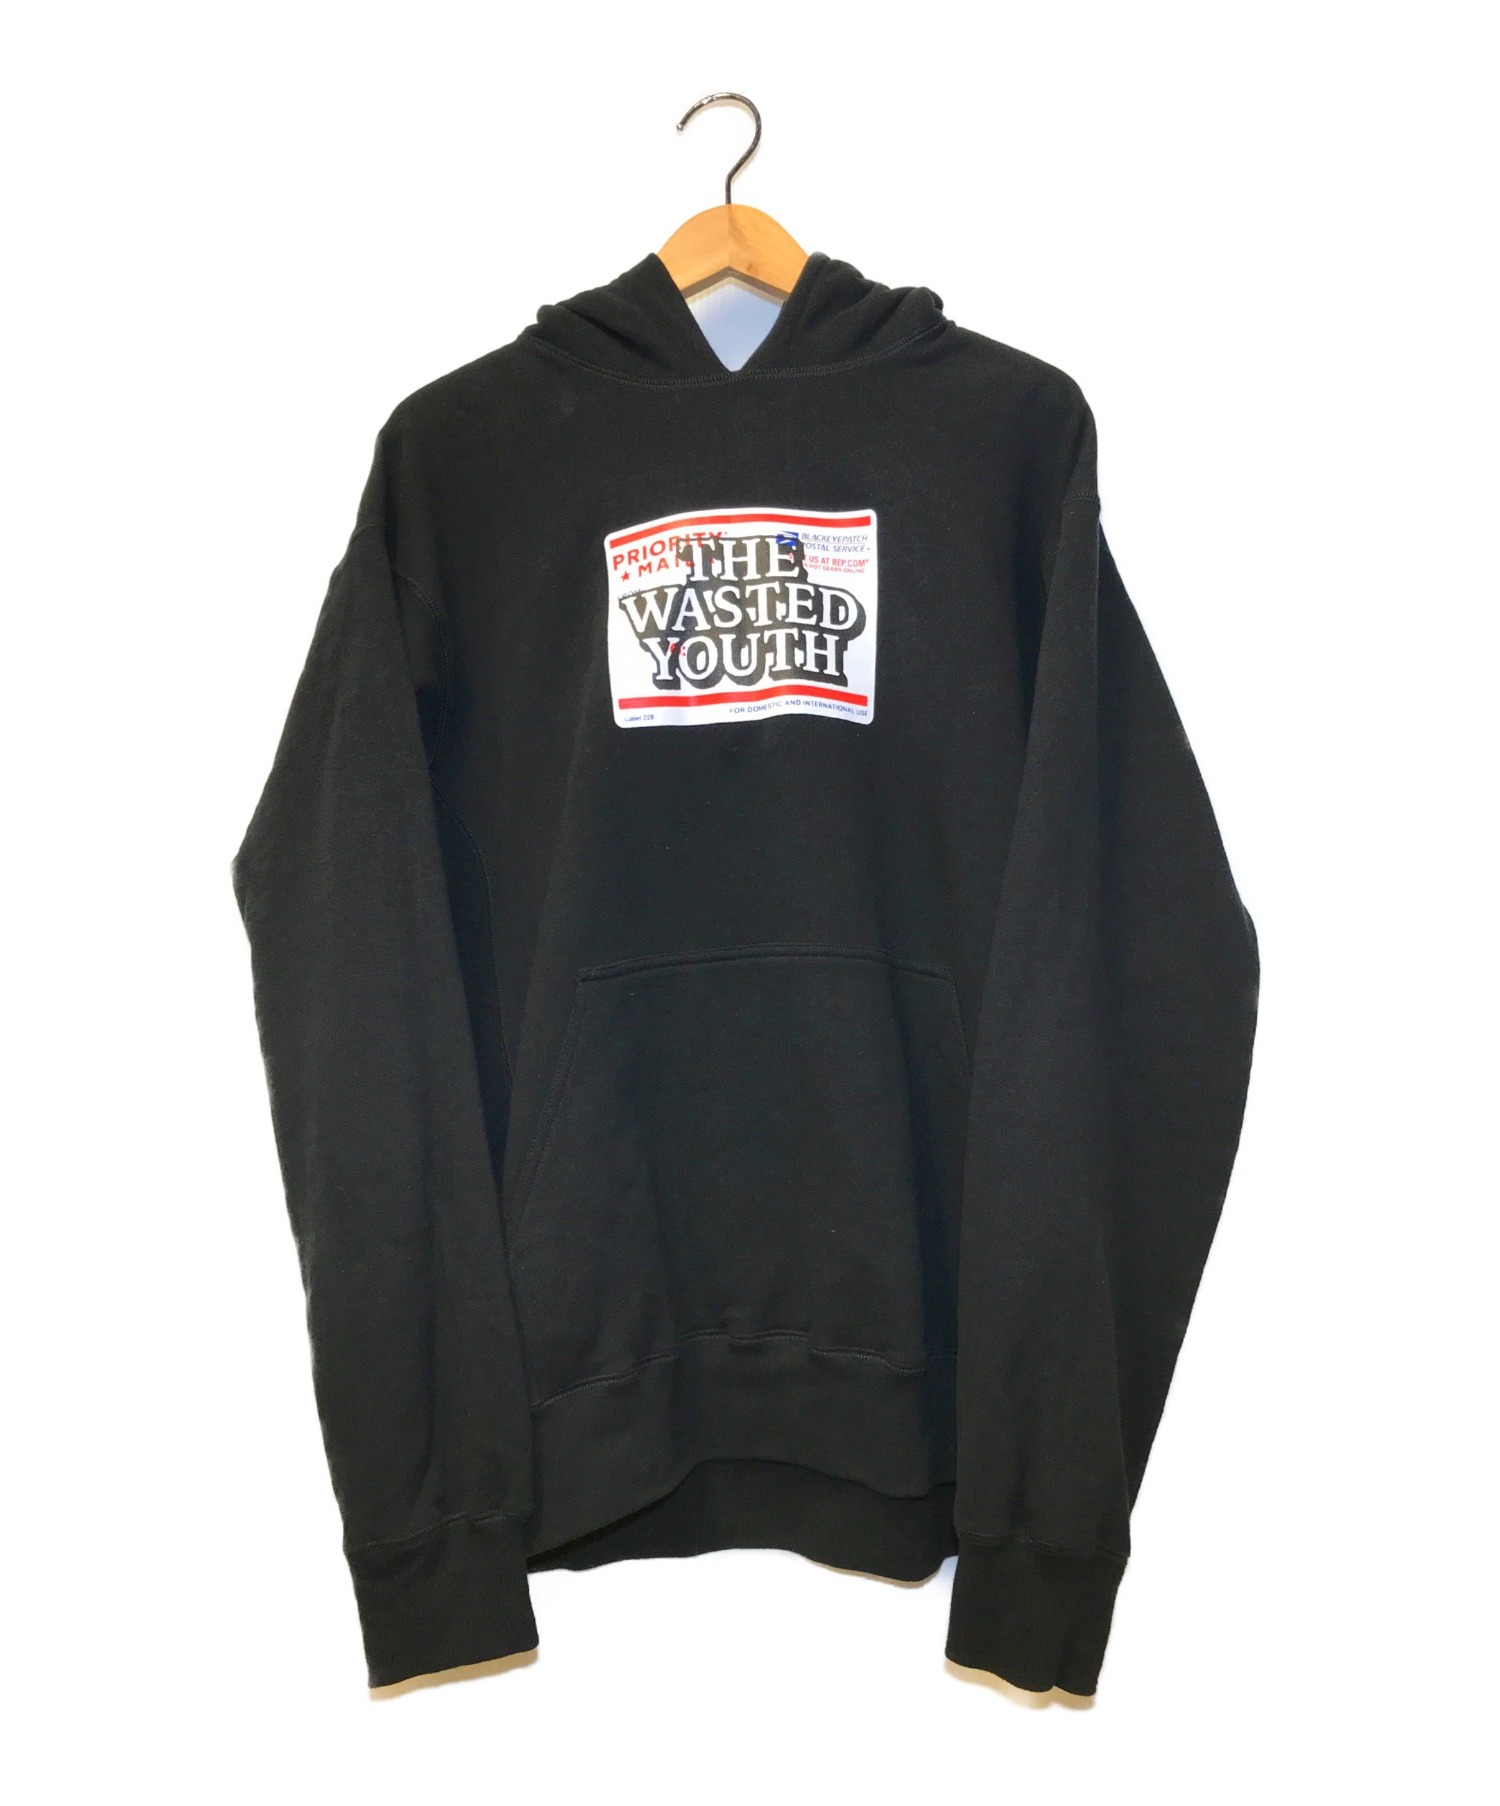 Wasted Youth PRIORITY LABEL HOODIE XL